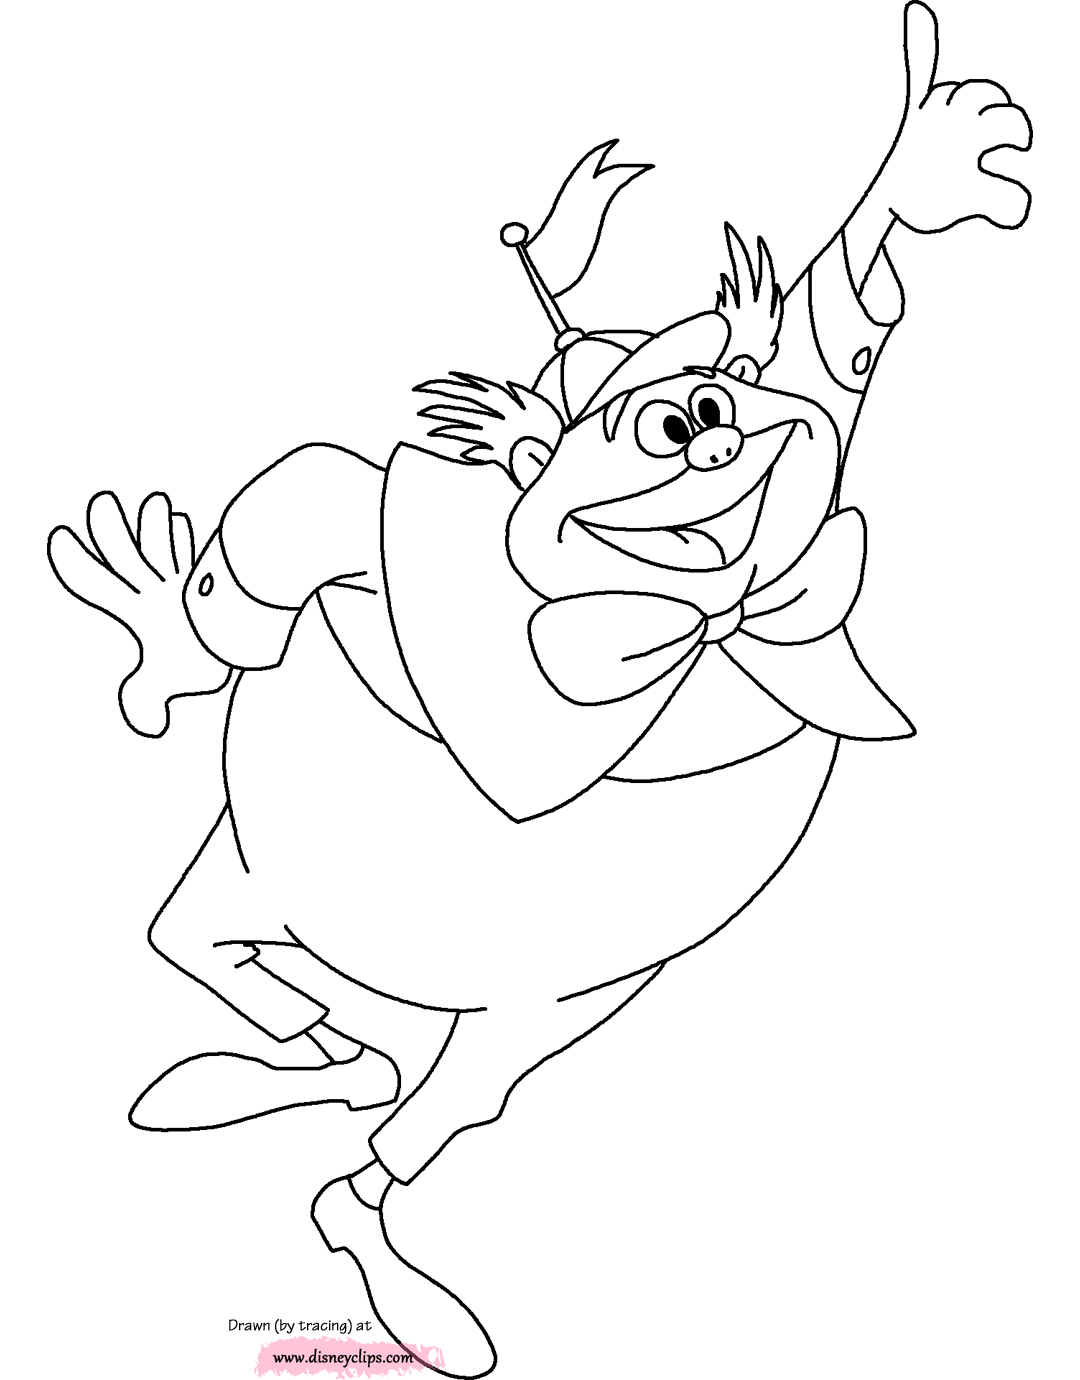 Alice in Wonderland Coloring Pages Disney Coloring Book